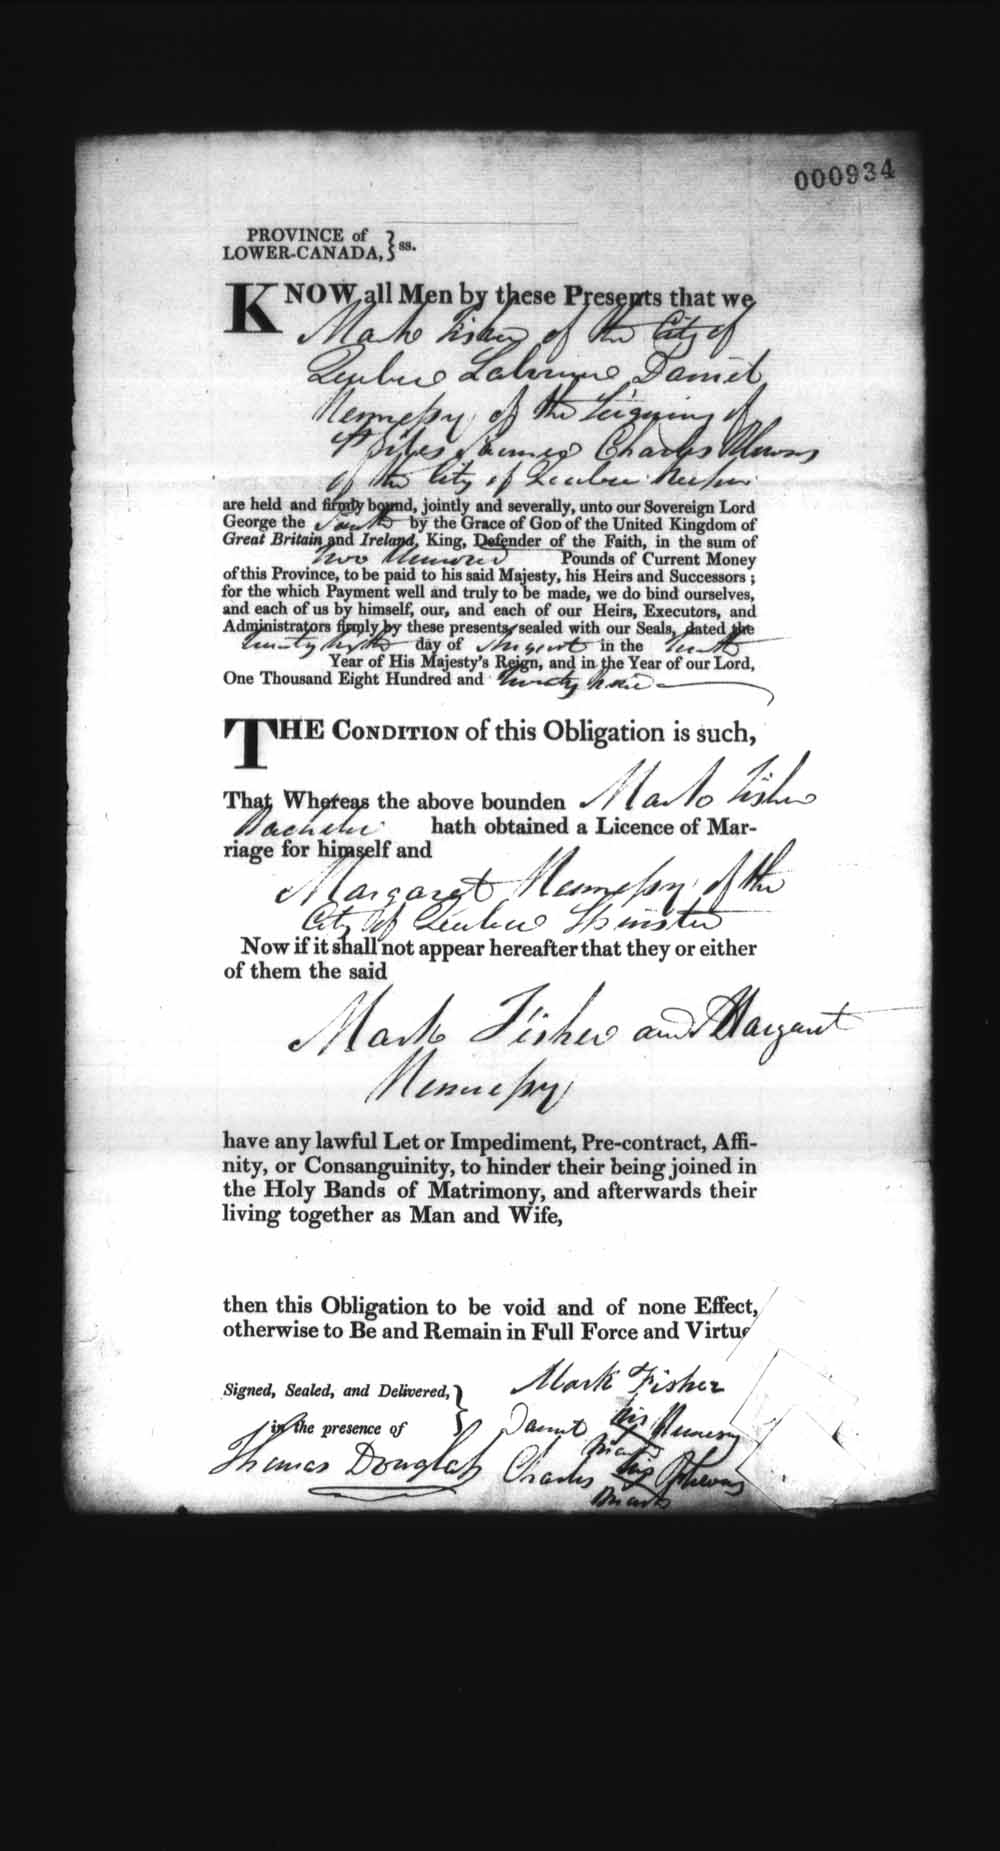 Digitized page of Upper and Lower Canada Marriage Bonds (1779-1865) for Image No.: e008237038